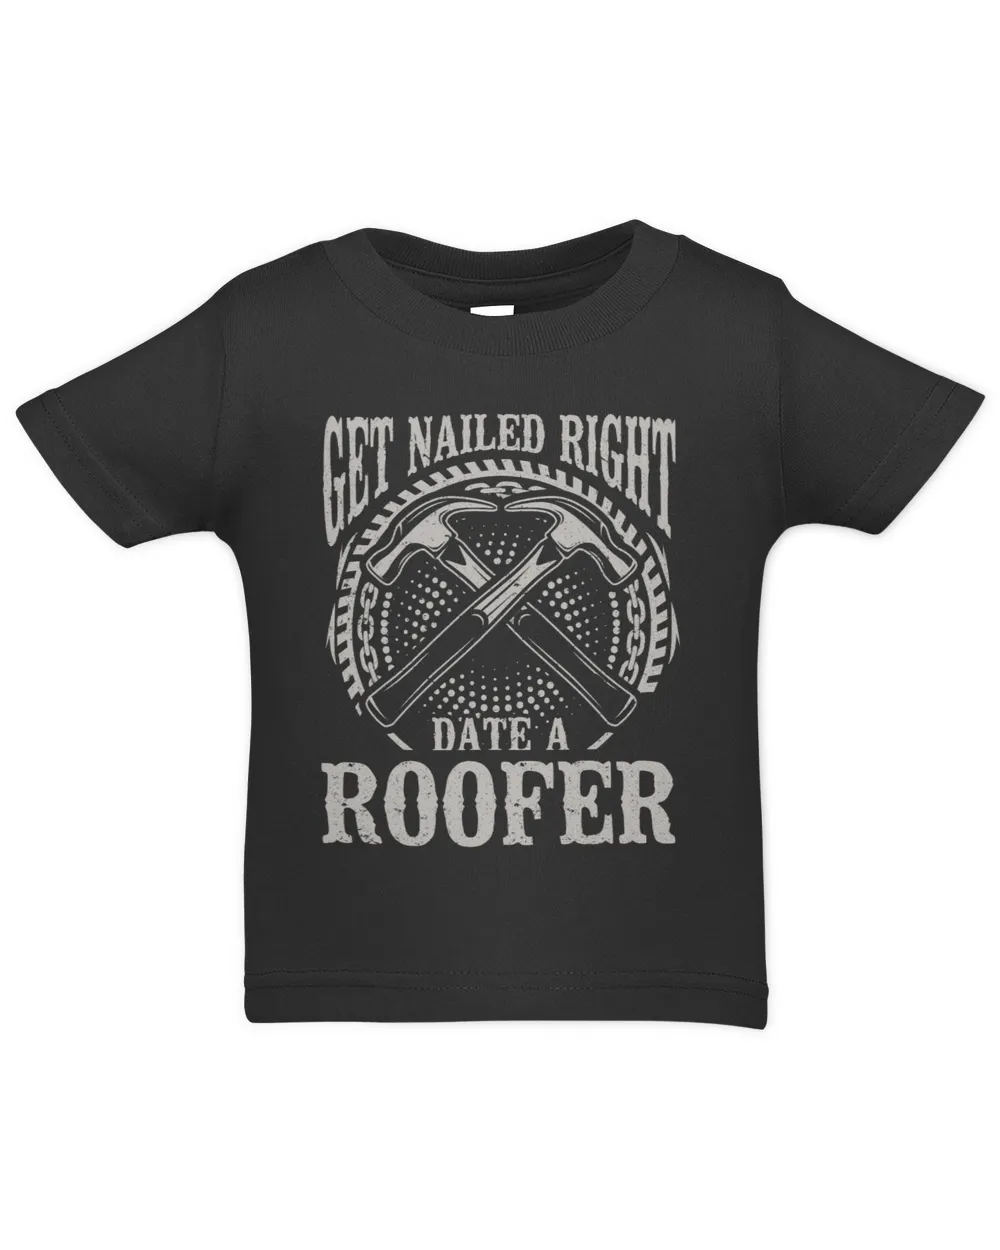 Roofing Im A Roofer Get Nailed Right Date A Roofer